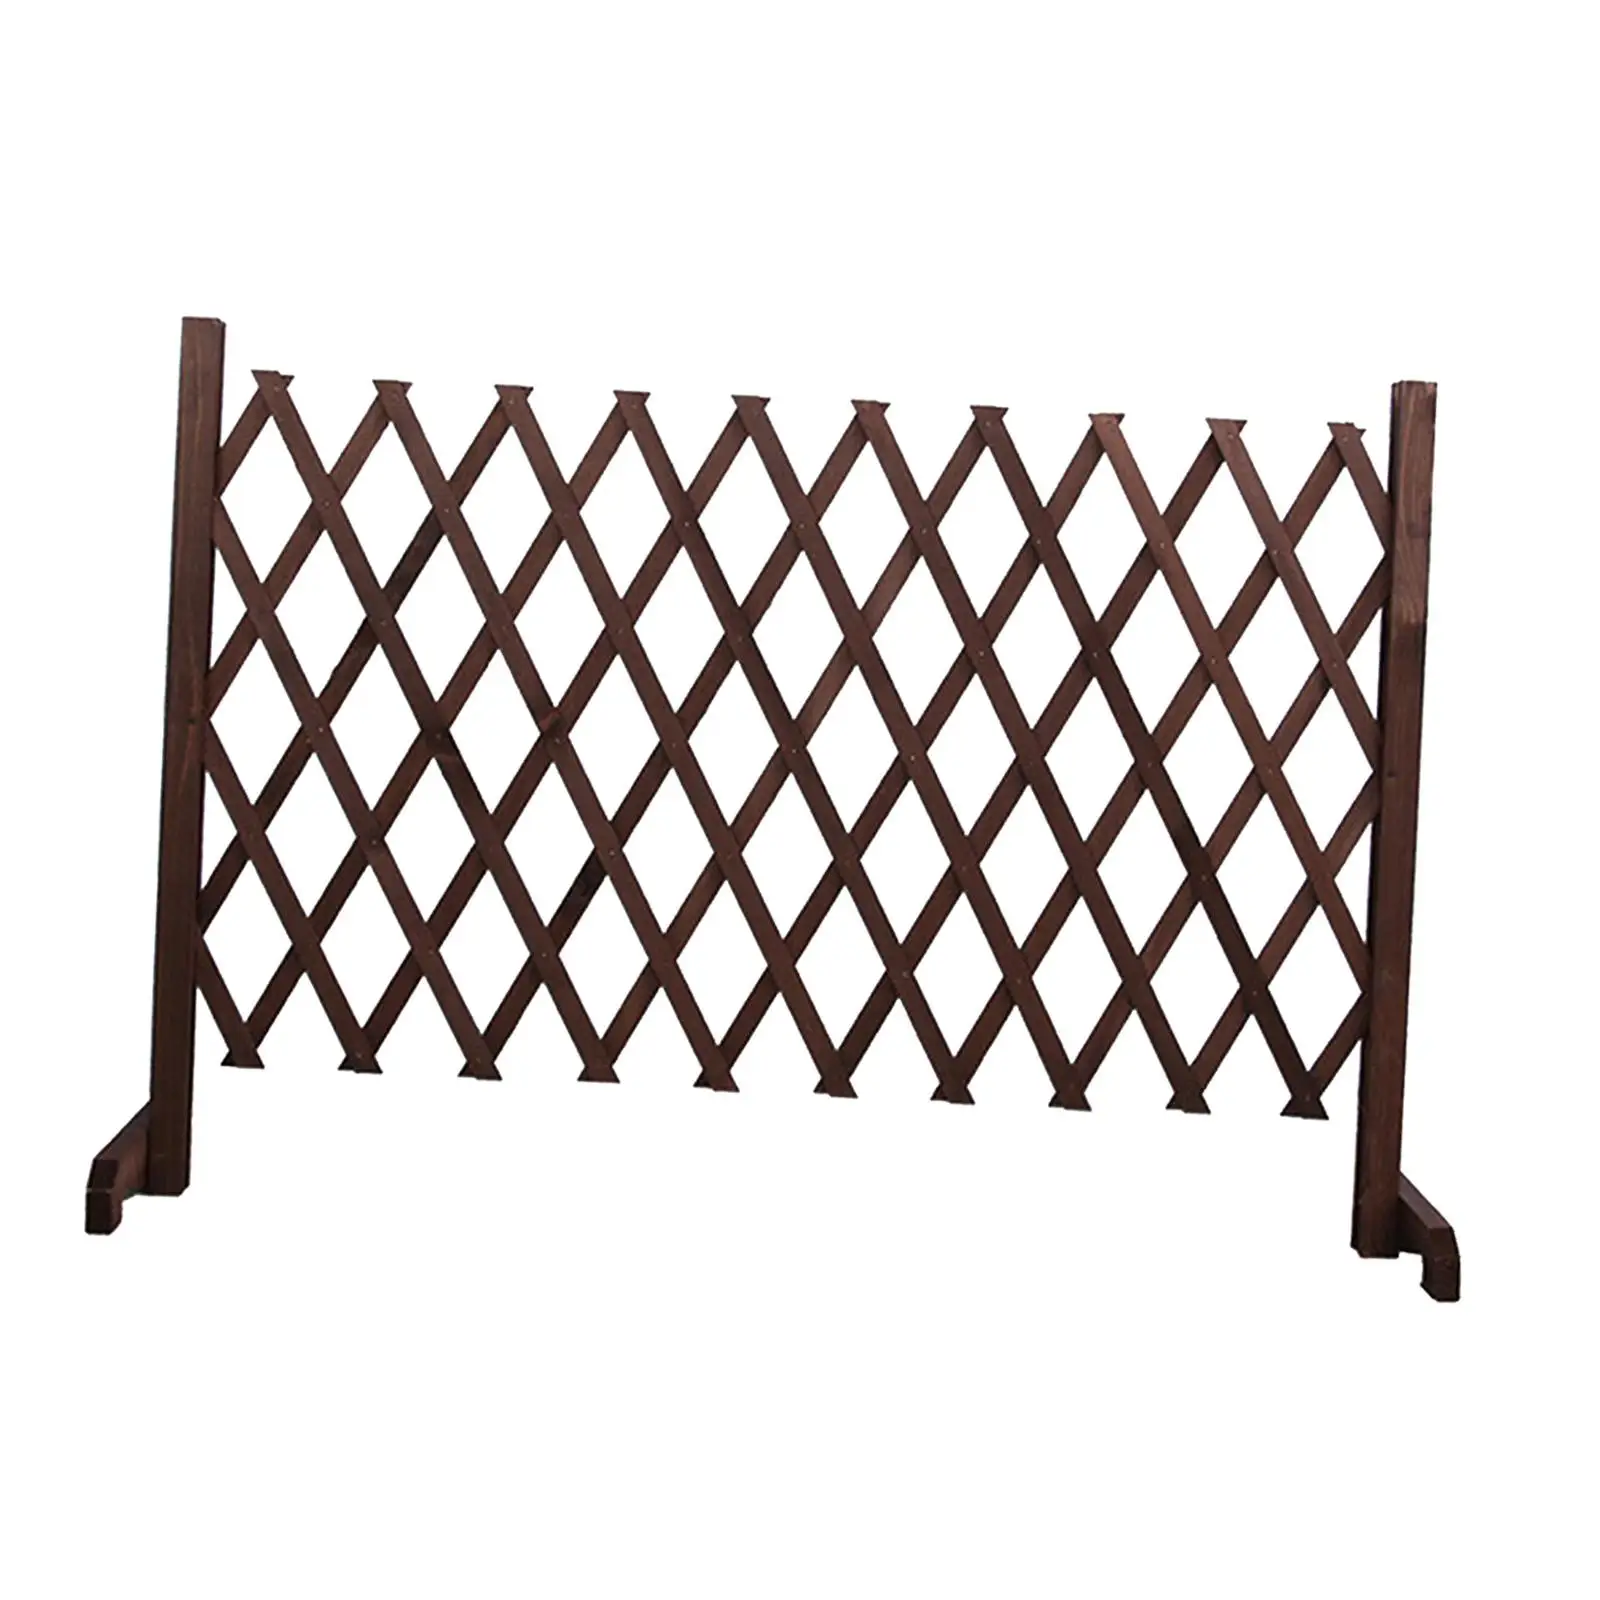 Dog Gate Expanding Folding Fence Barrier Pet Fence for Garden Lawn Stairways